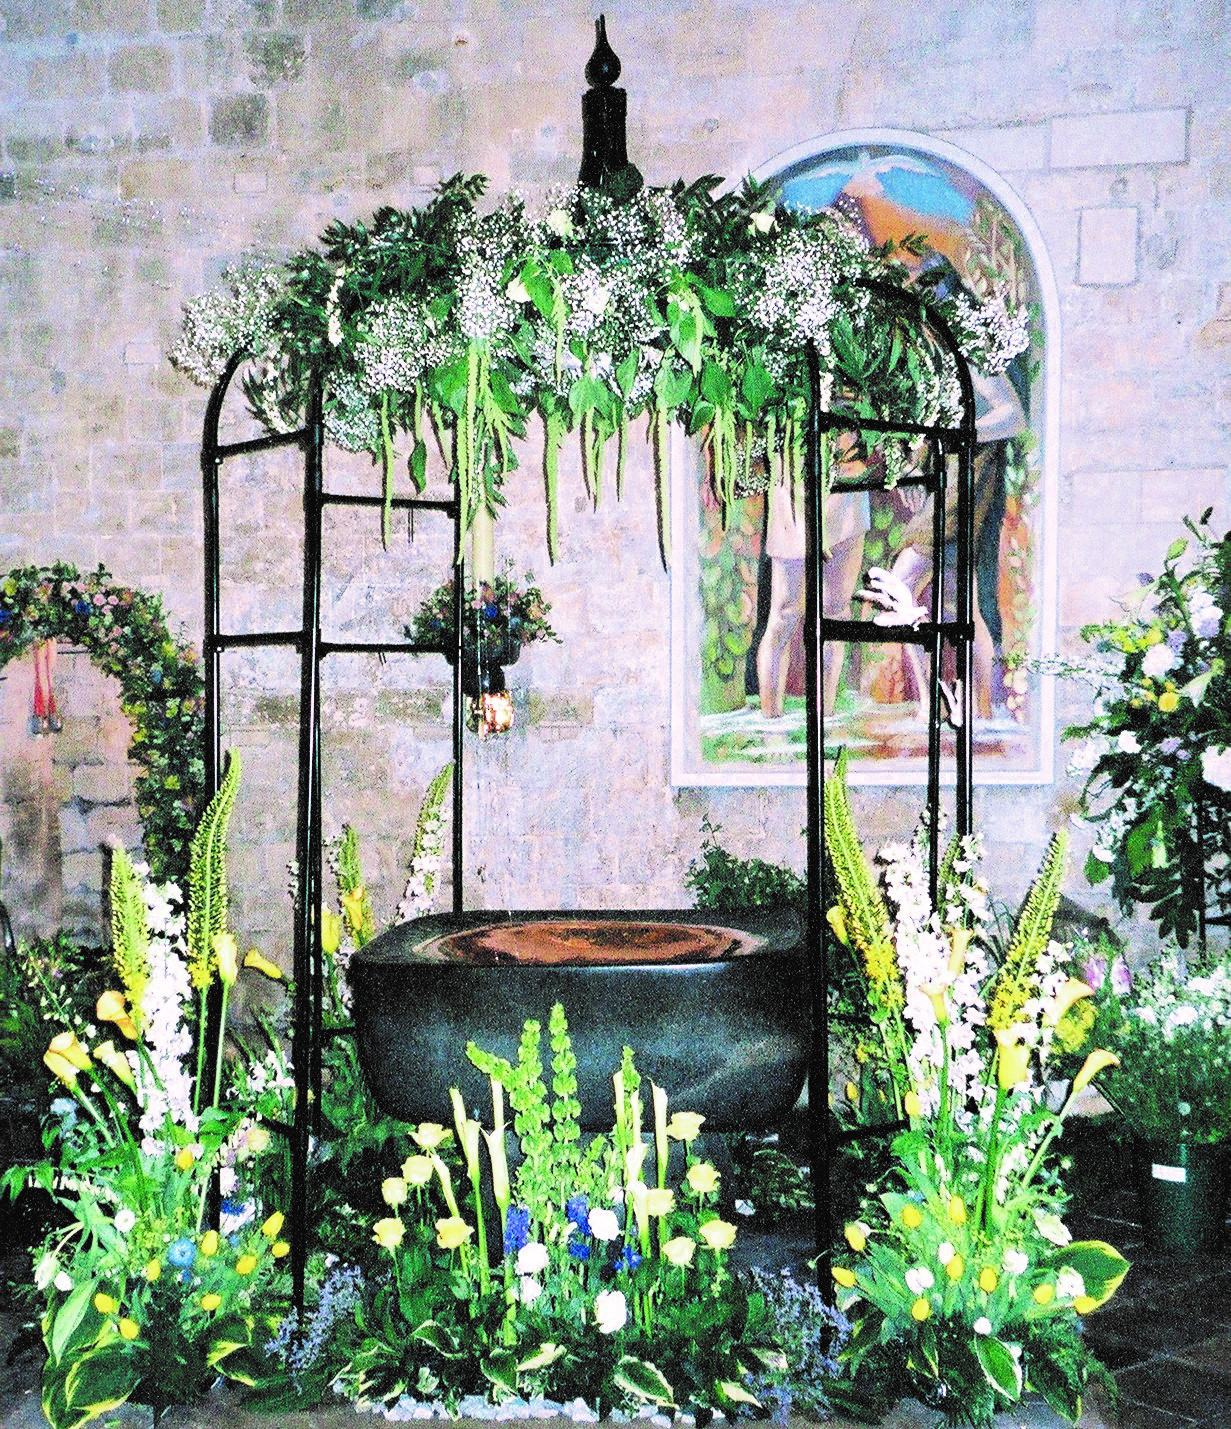 The Font, 2004